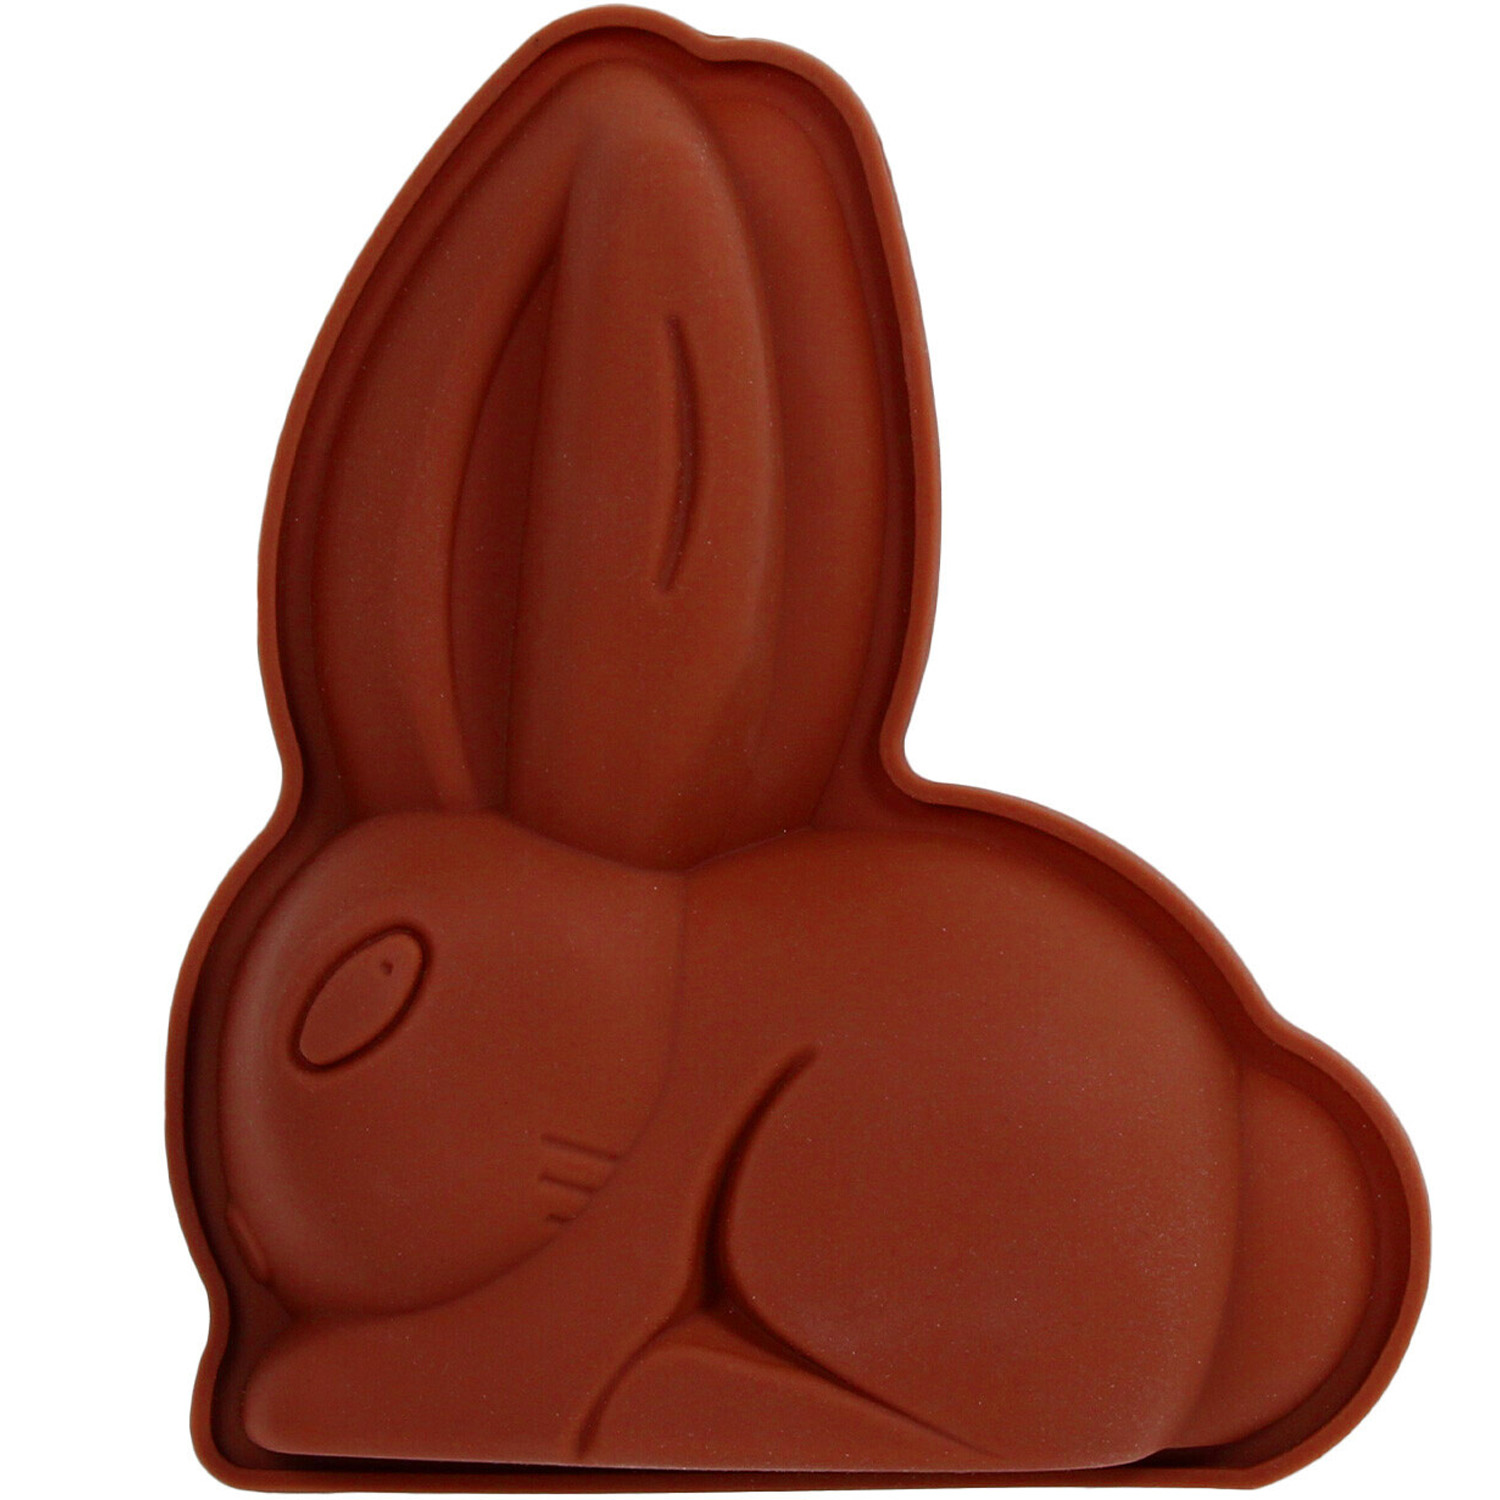 Silicone Rabbit Baking Mould - Brown Image